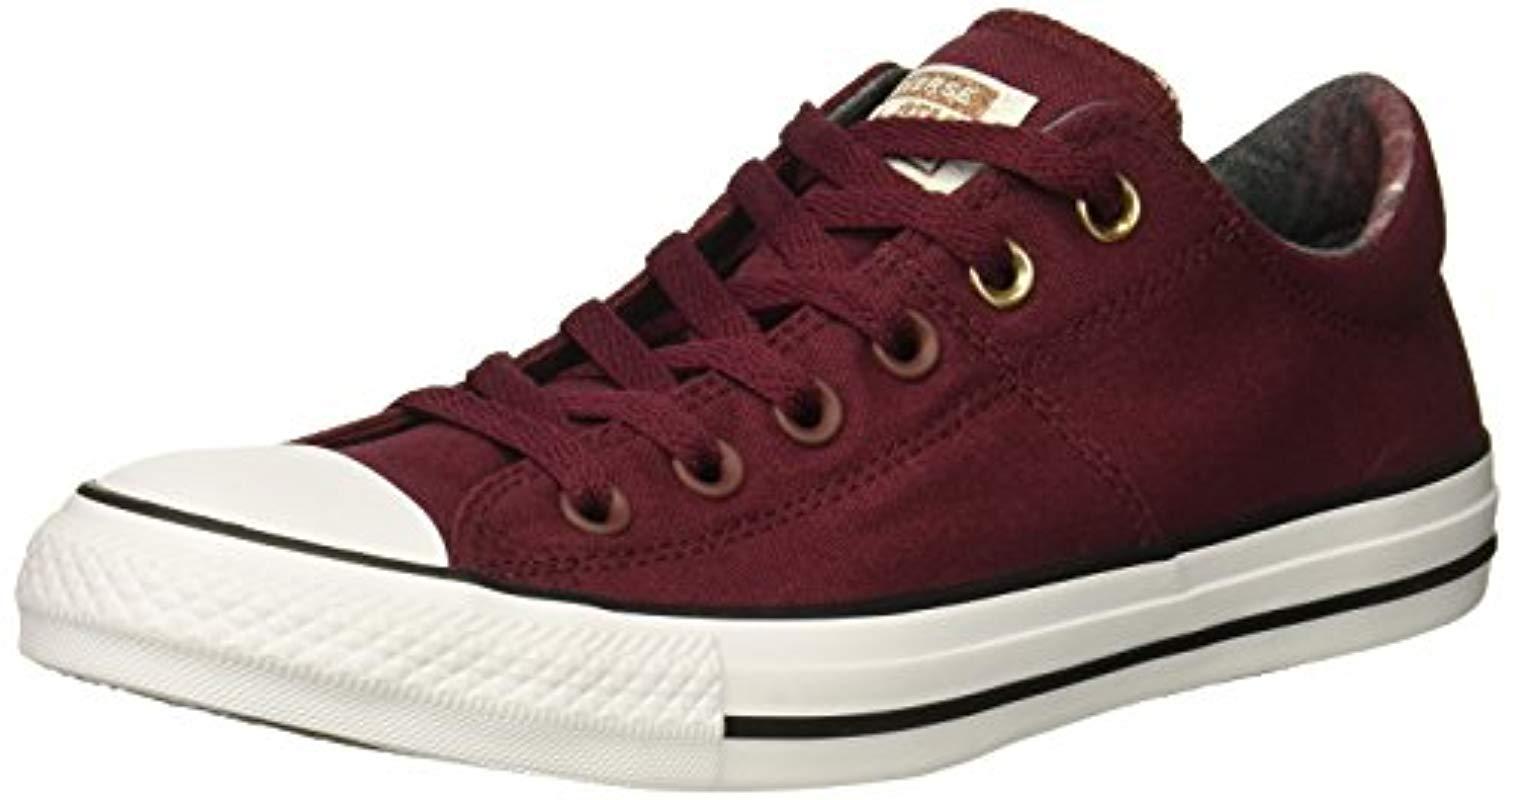 Converse Chuck Taylor All Star Plaid Lined Madison Low Top Sneaker, Dark Burgundy/white, 7 M |